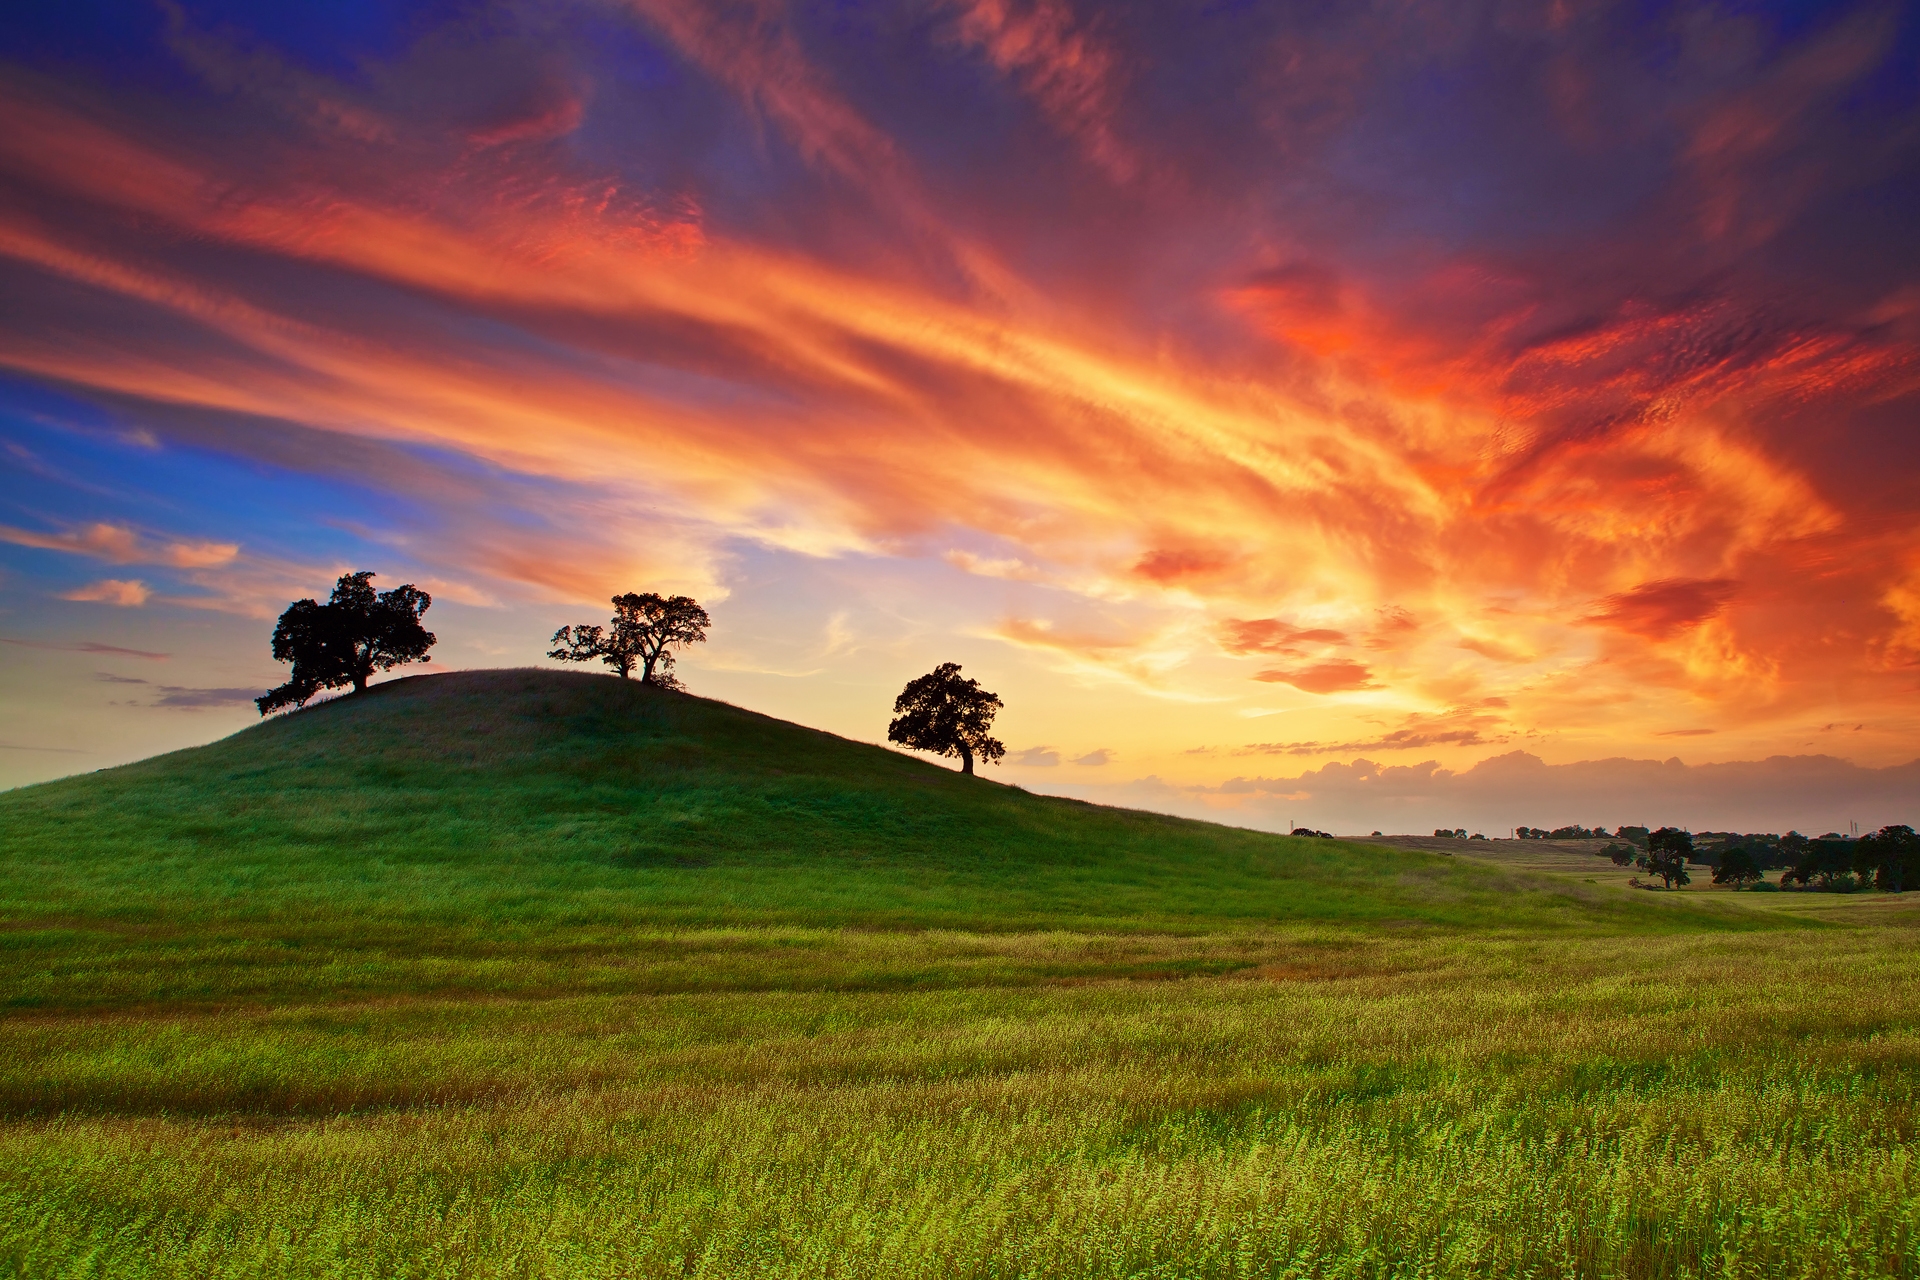 spring, california, usa, trees, field, sunset, nature, grass, sky, clouds, united states, may 32K